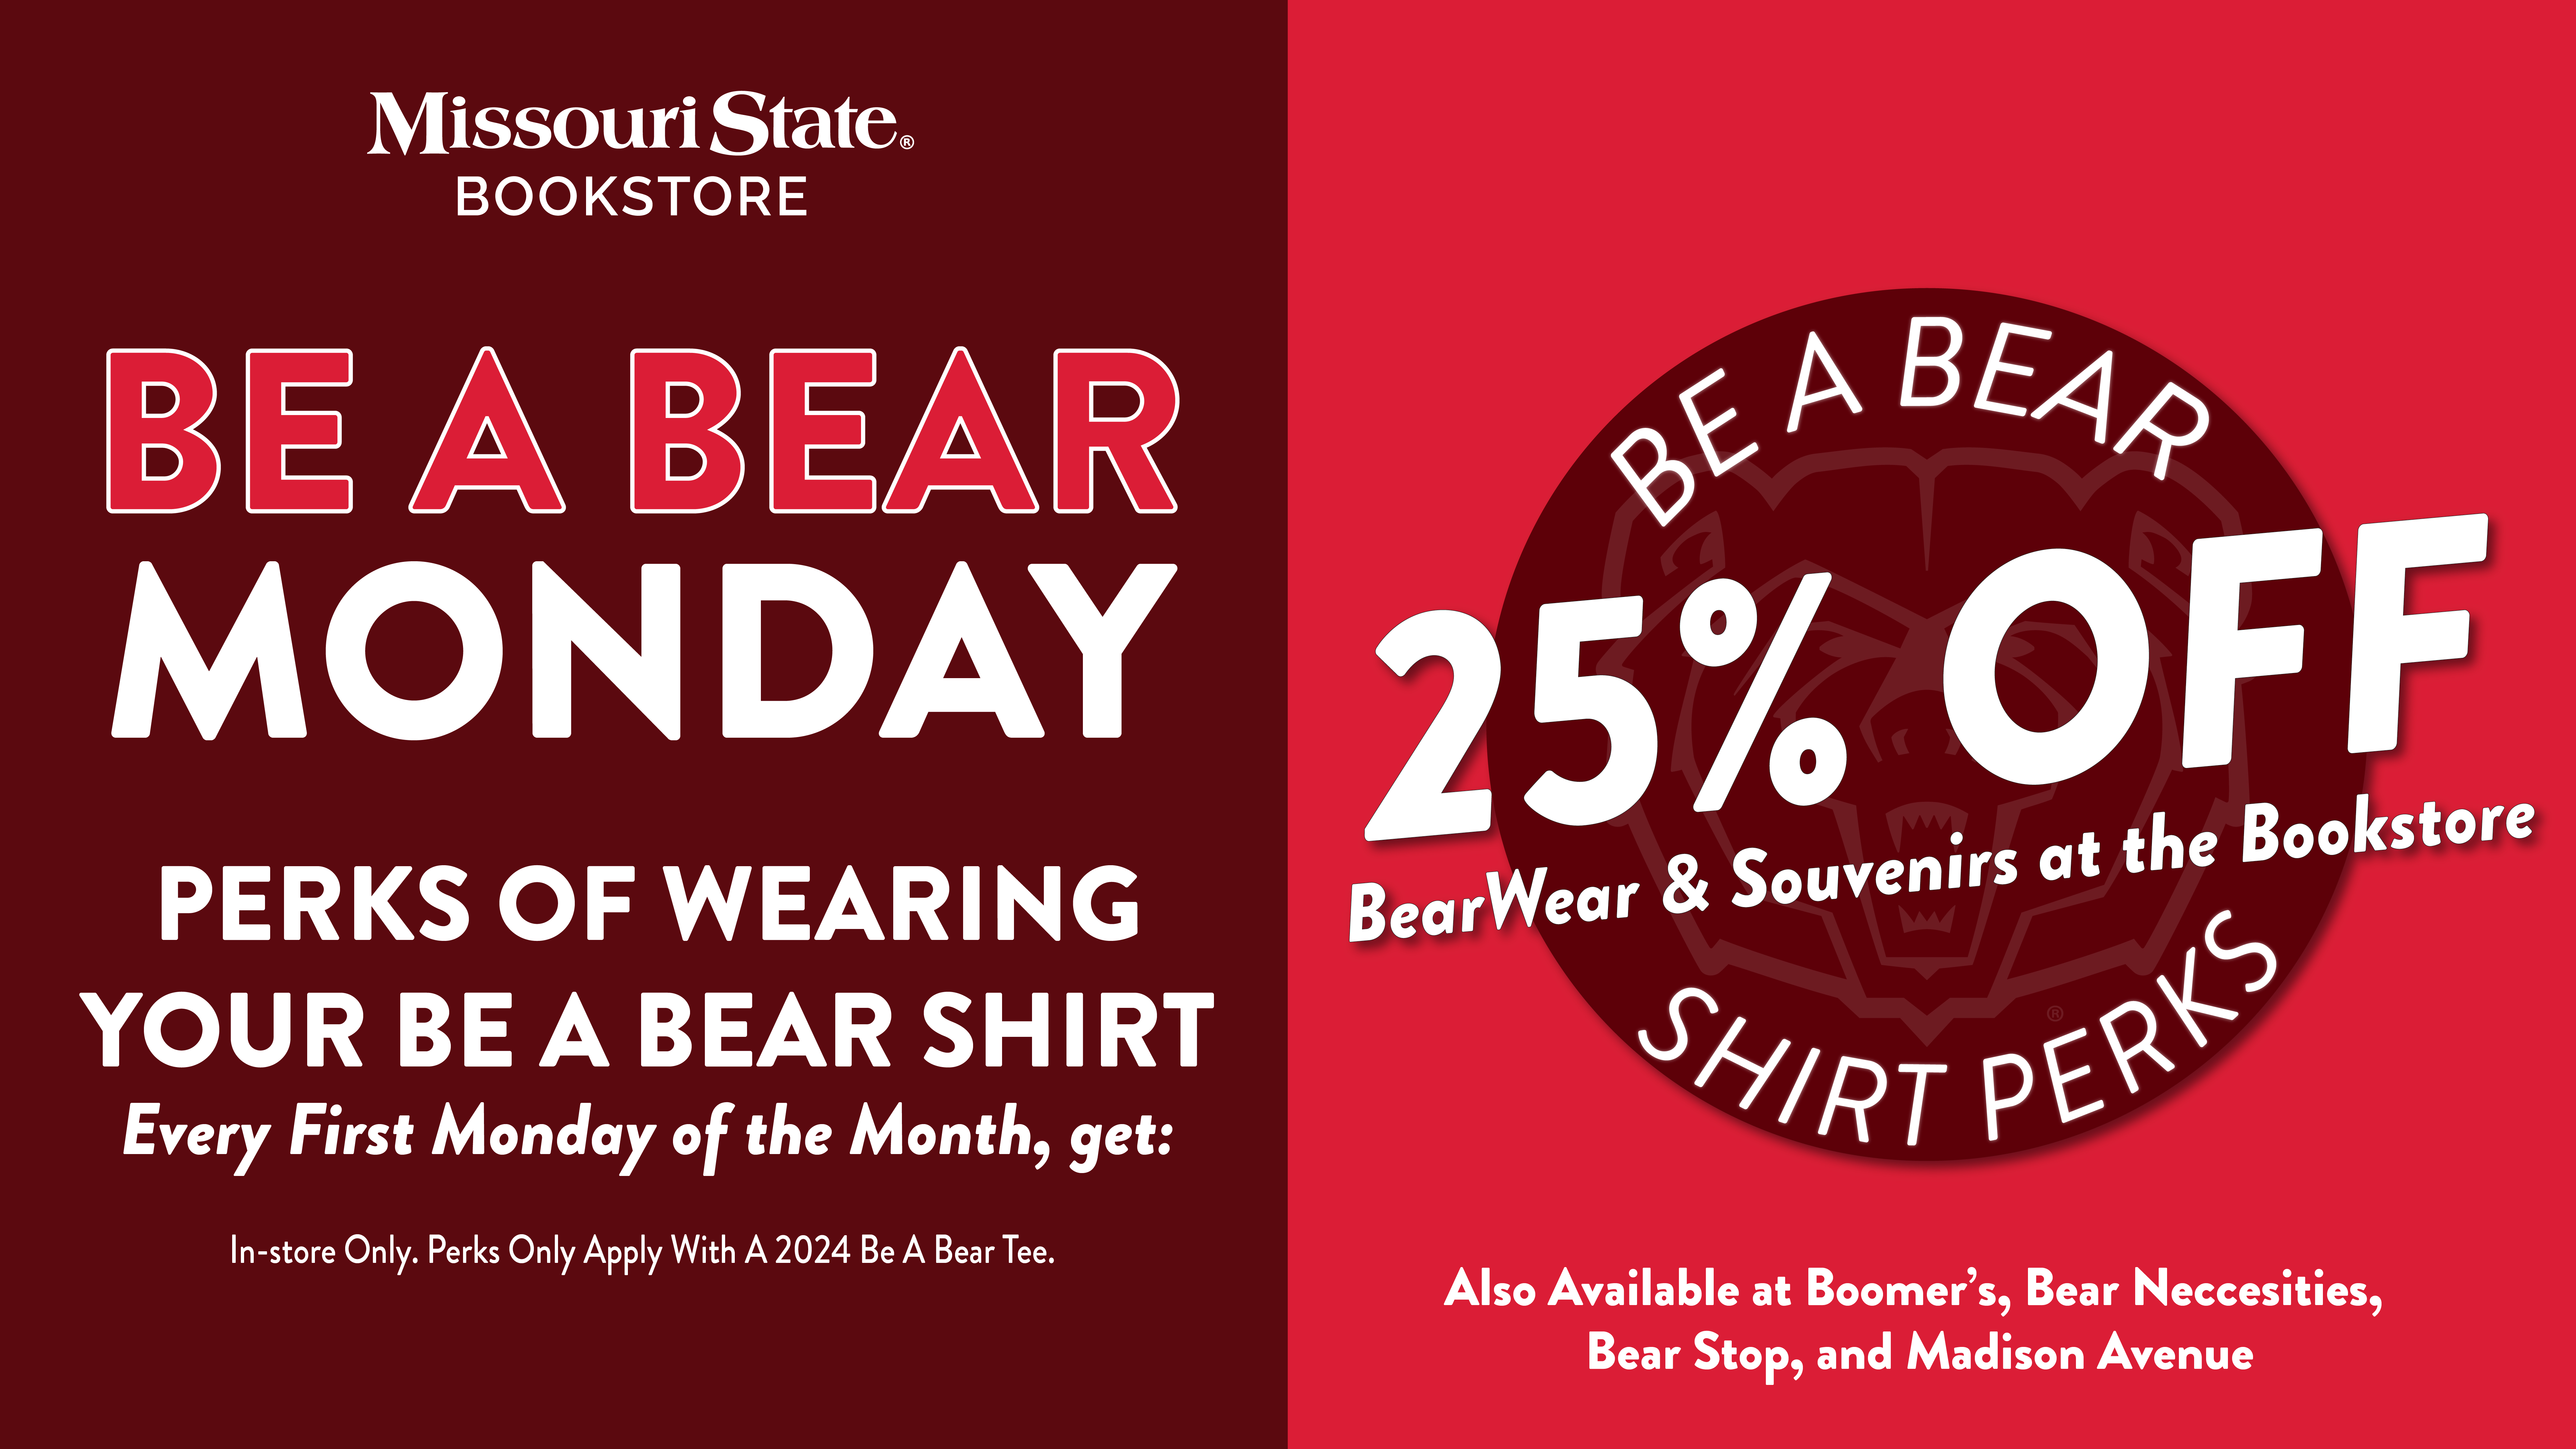 Be A Bear Monday, Perks of wearing your Be a Bear shirt every first Monday of the month to get: 25% off BearWear and souvenirs at the bookstore, also available at Boomer's, Bear Necessities, Bear Stop and Madison Ave